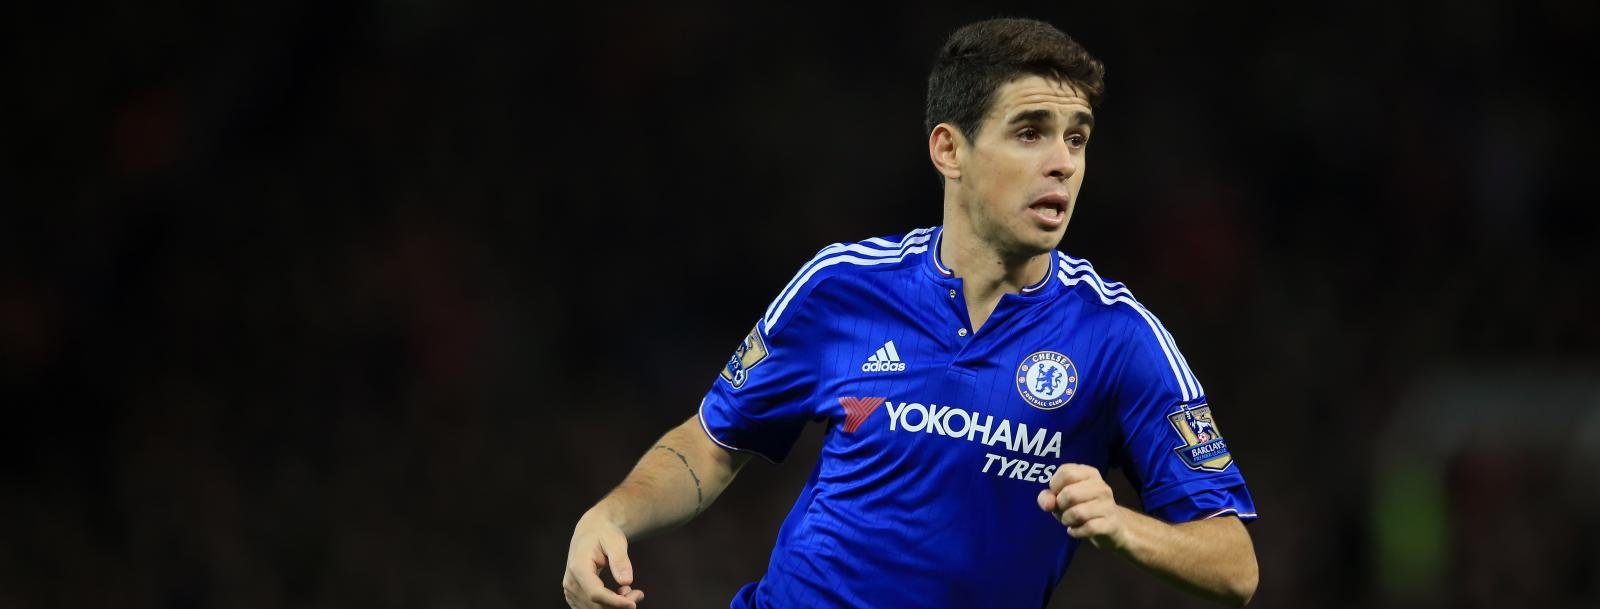 Euro giants looking to lure away £30m rated Chelsea midfielder